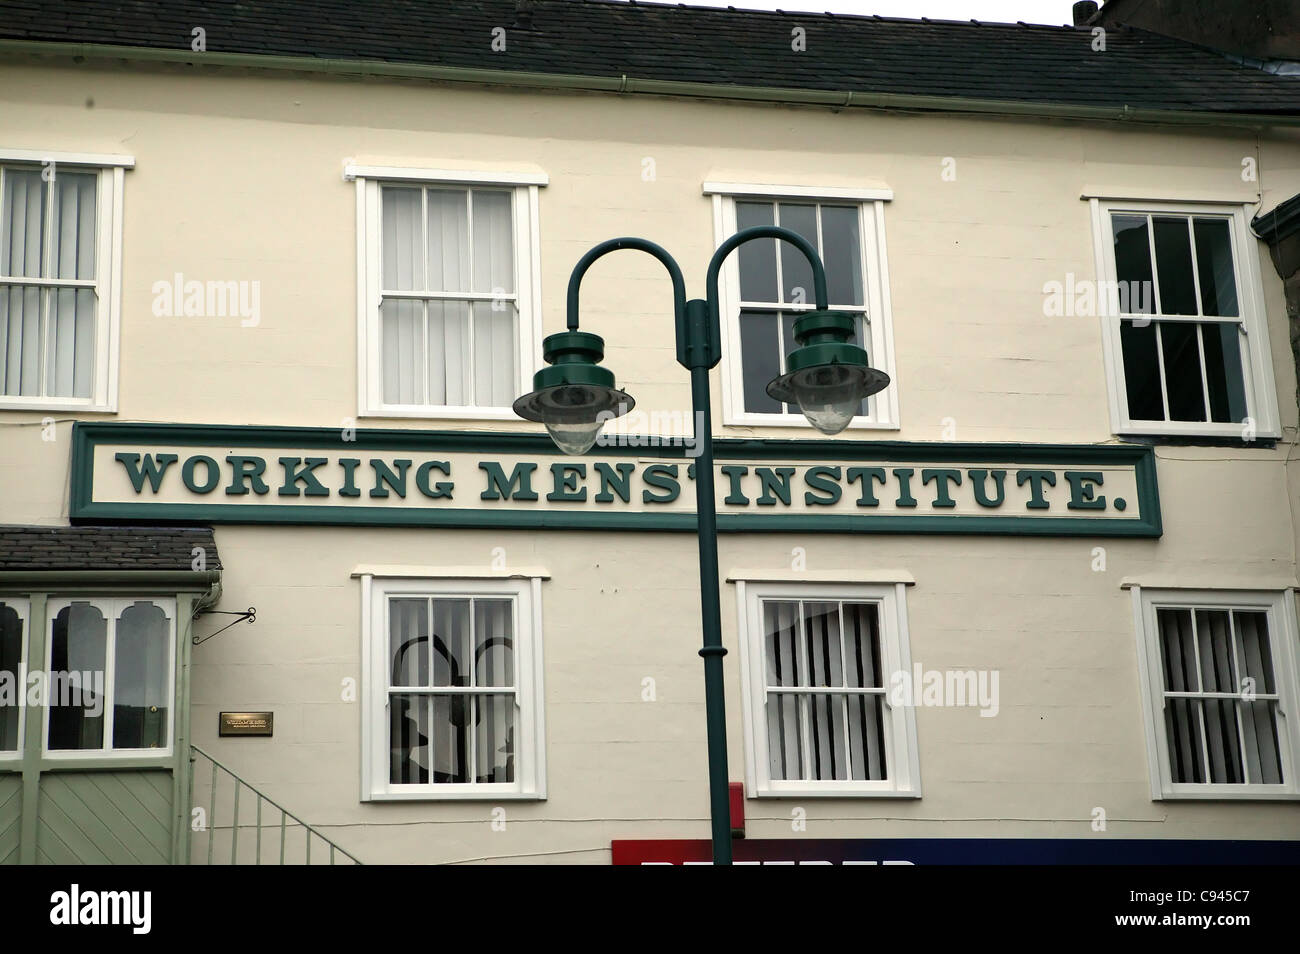 Working, Mens, Institute, Building Frontage, Working Mens Club, Cream and green, Green Lettering, Historical Building Stock Photo